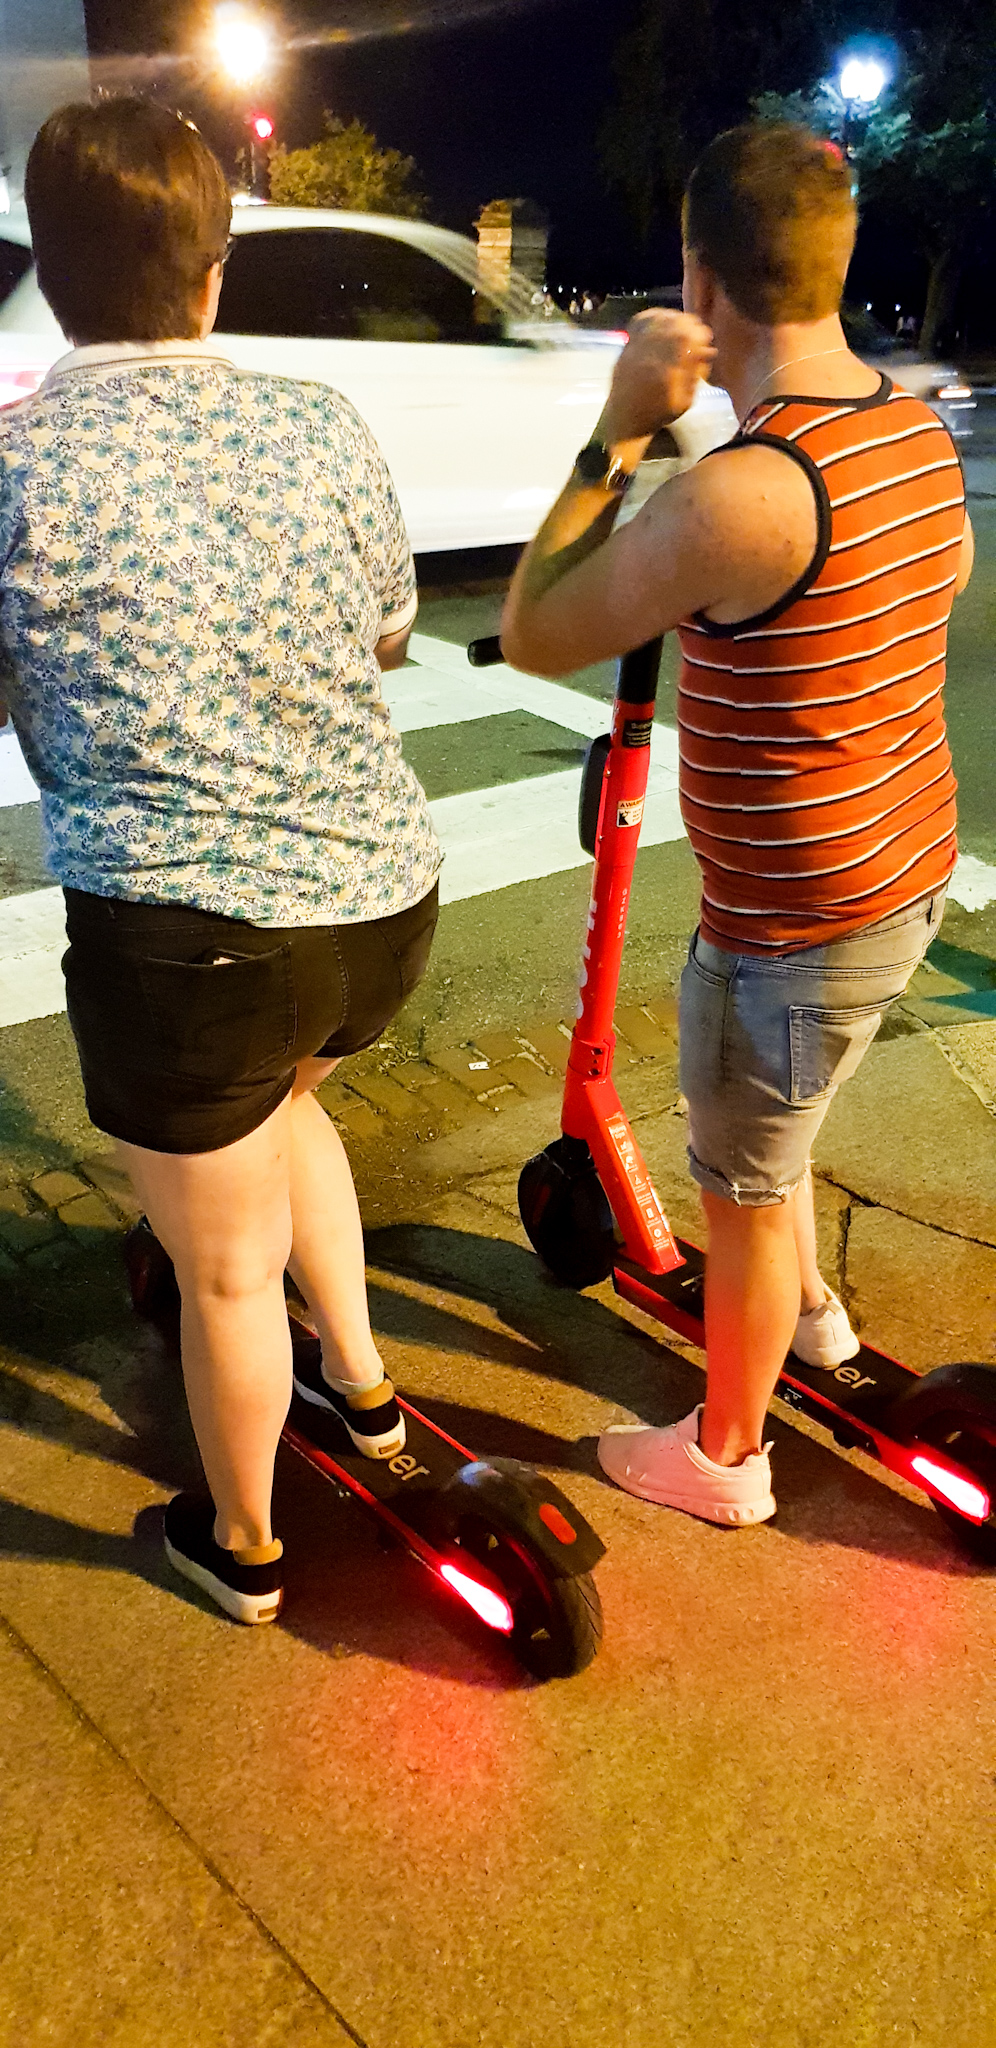 scooters